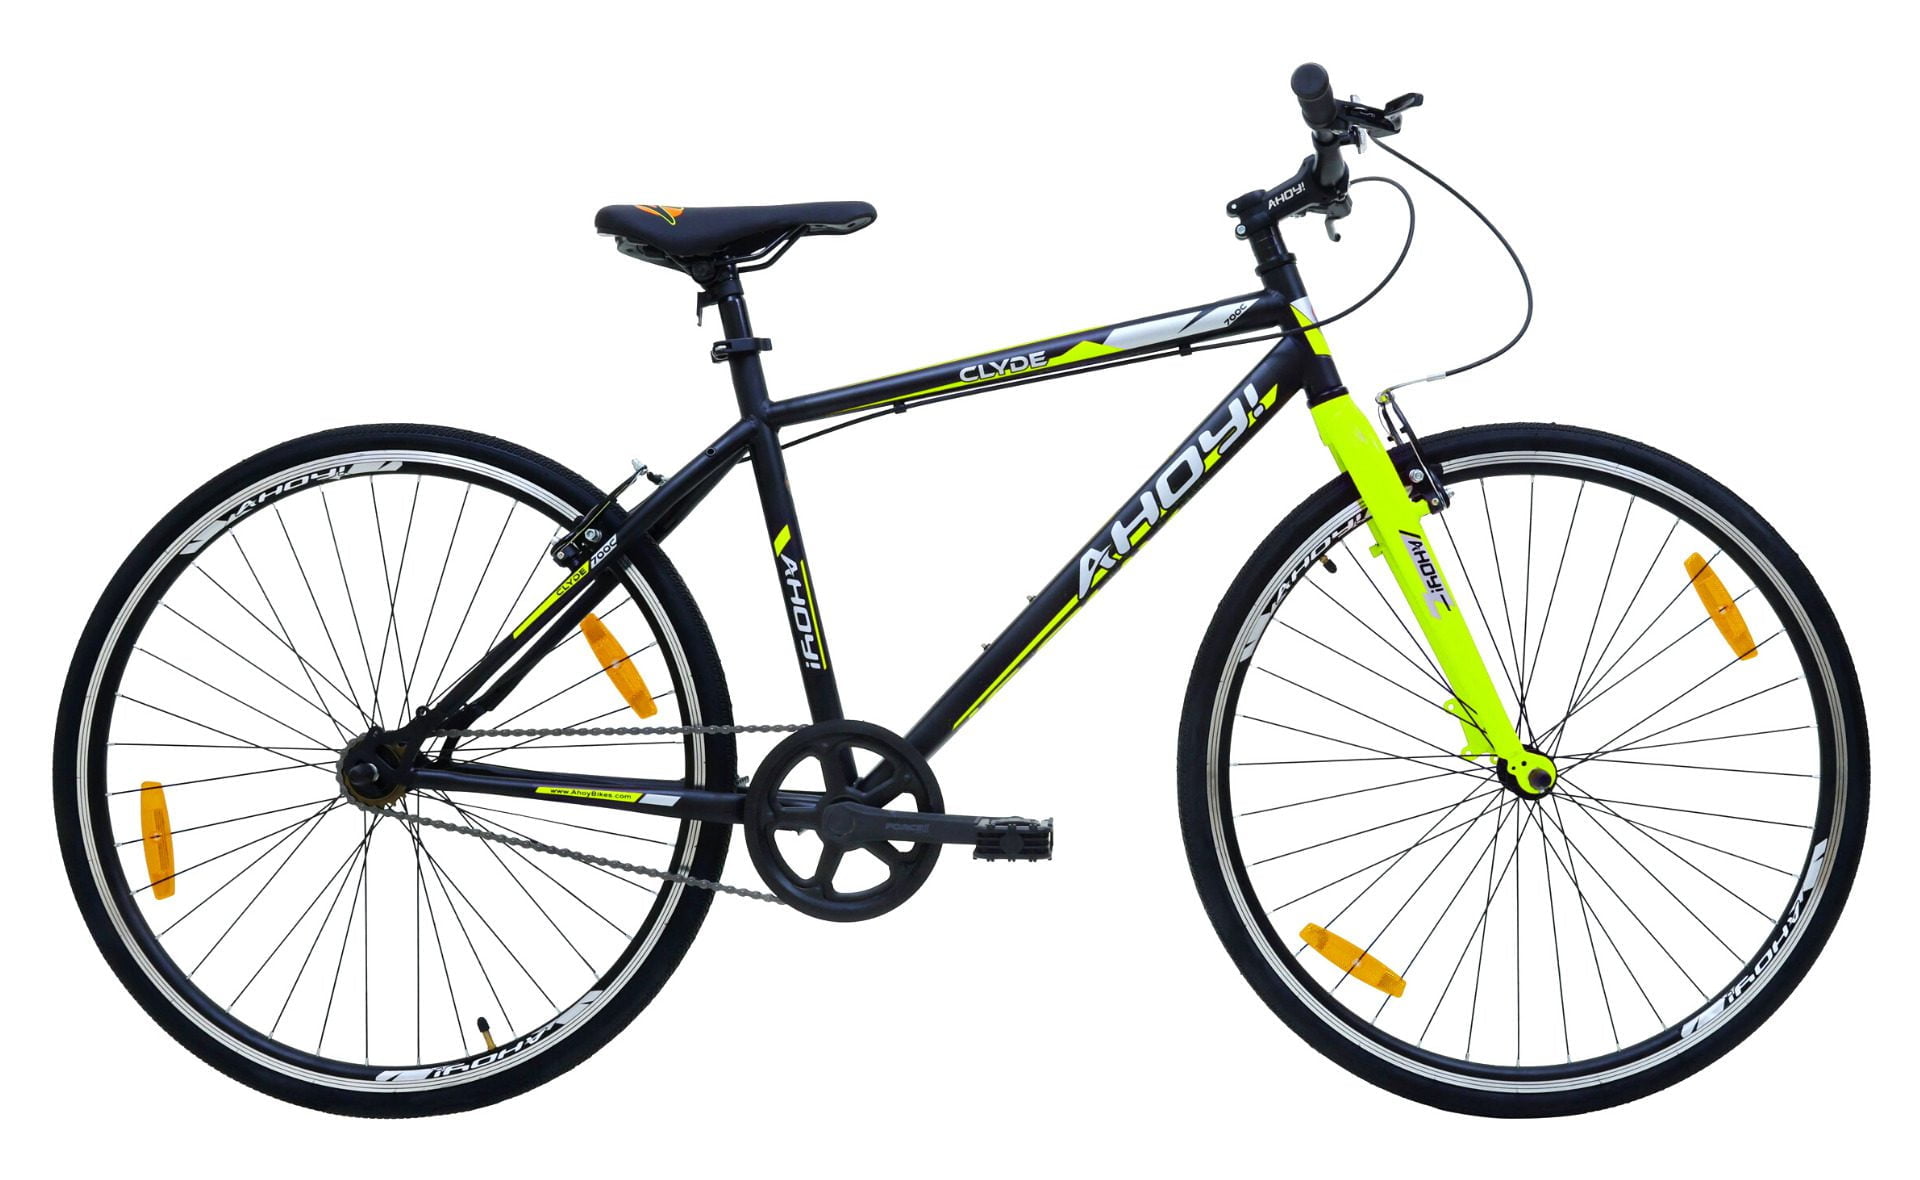 Clyde Hybrid Bicycle 700C | Buy Yellow Non Gear Bike for Men